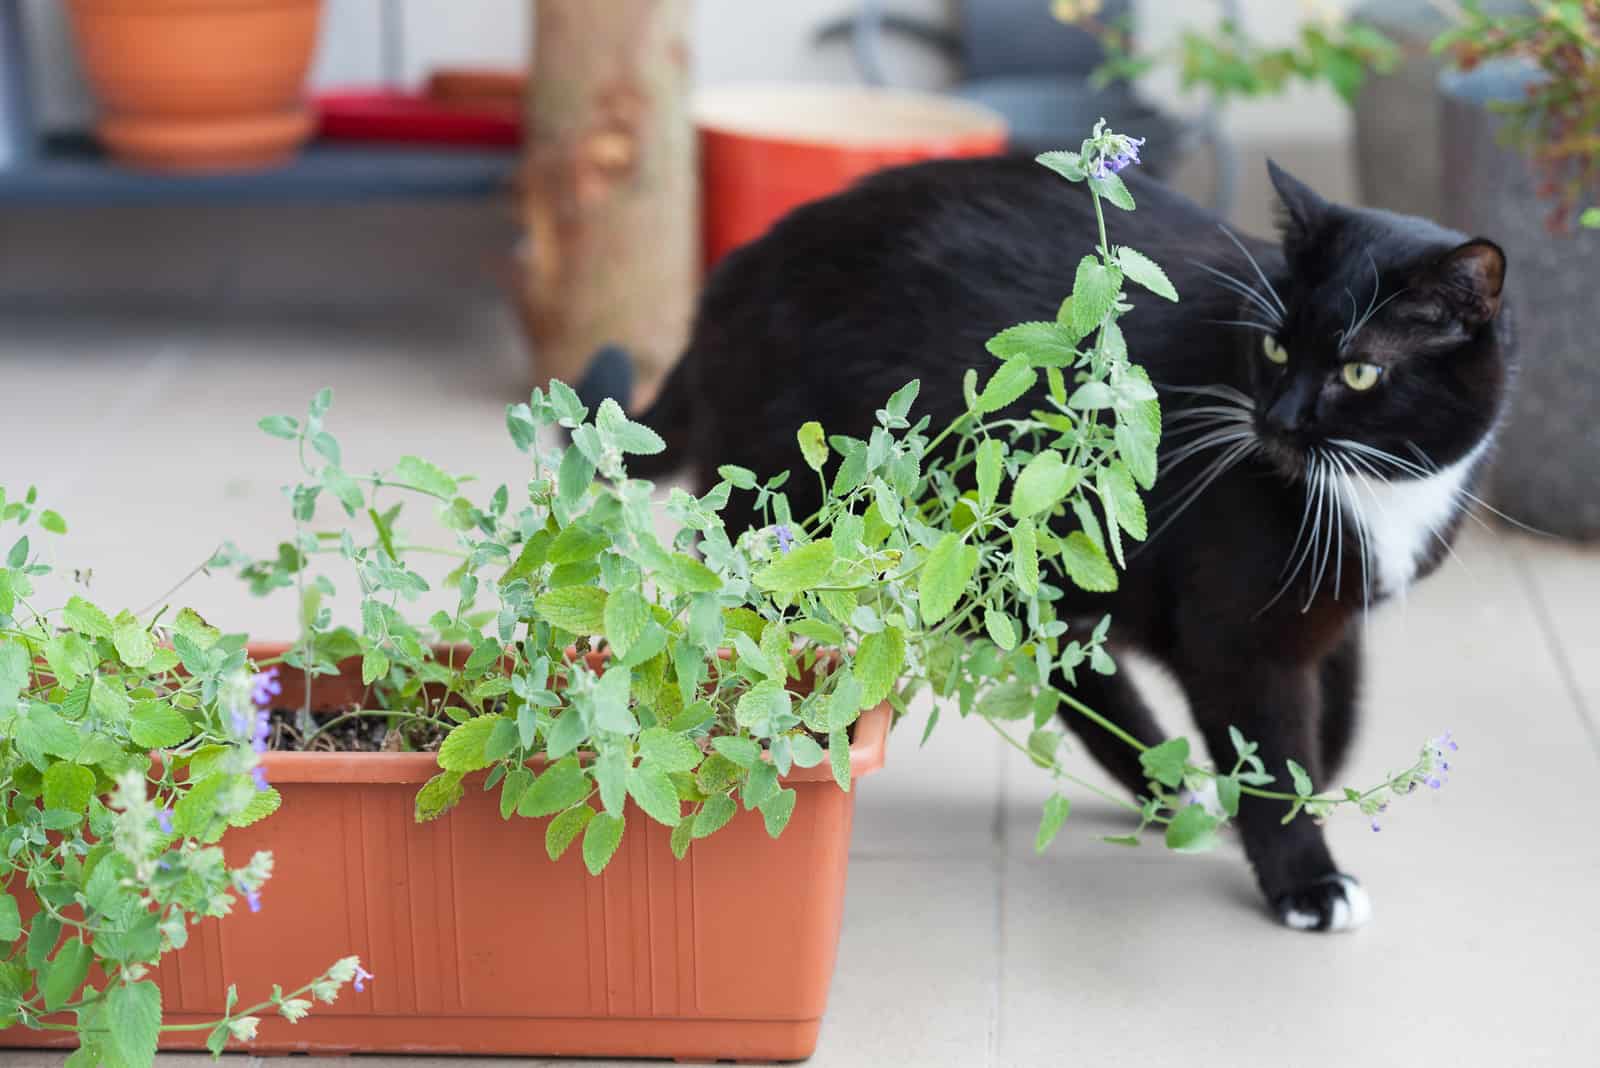 green herb growing in a container and black cat walking around